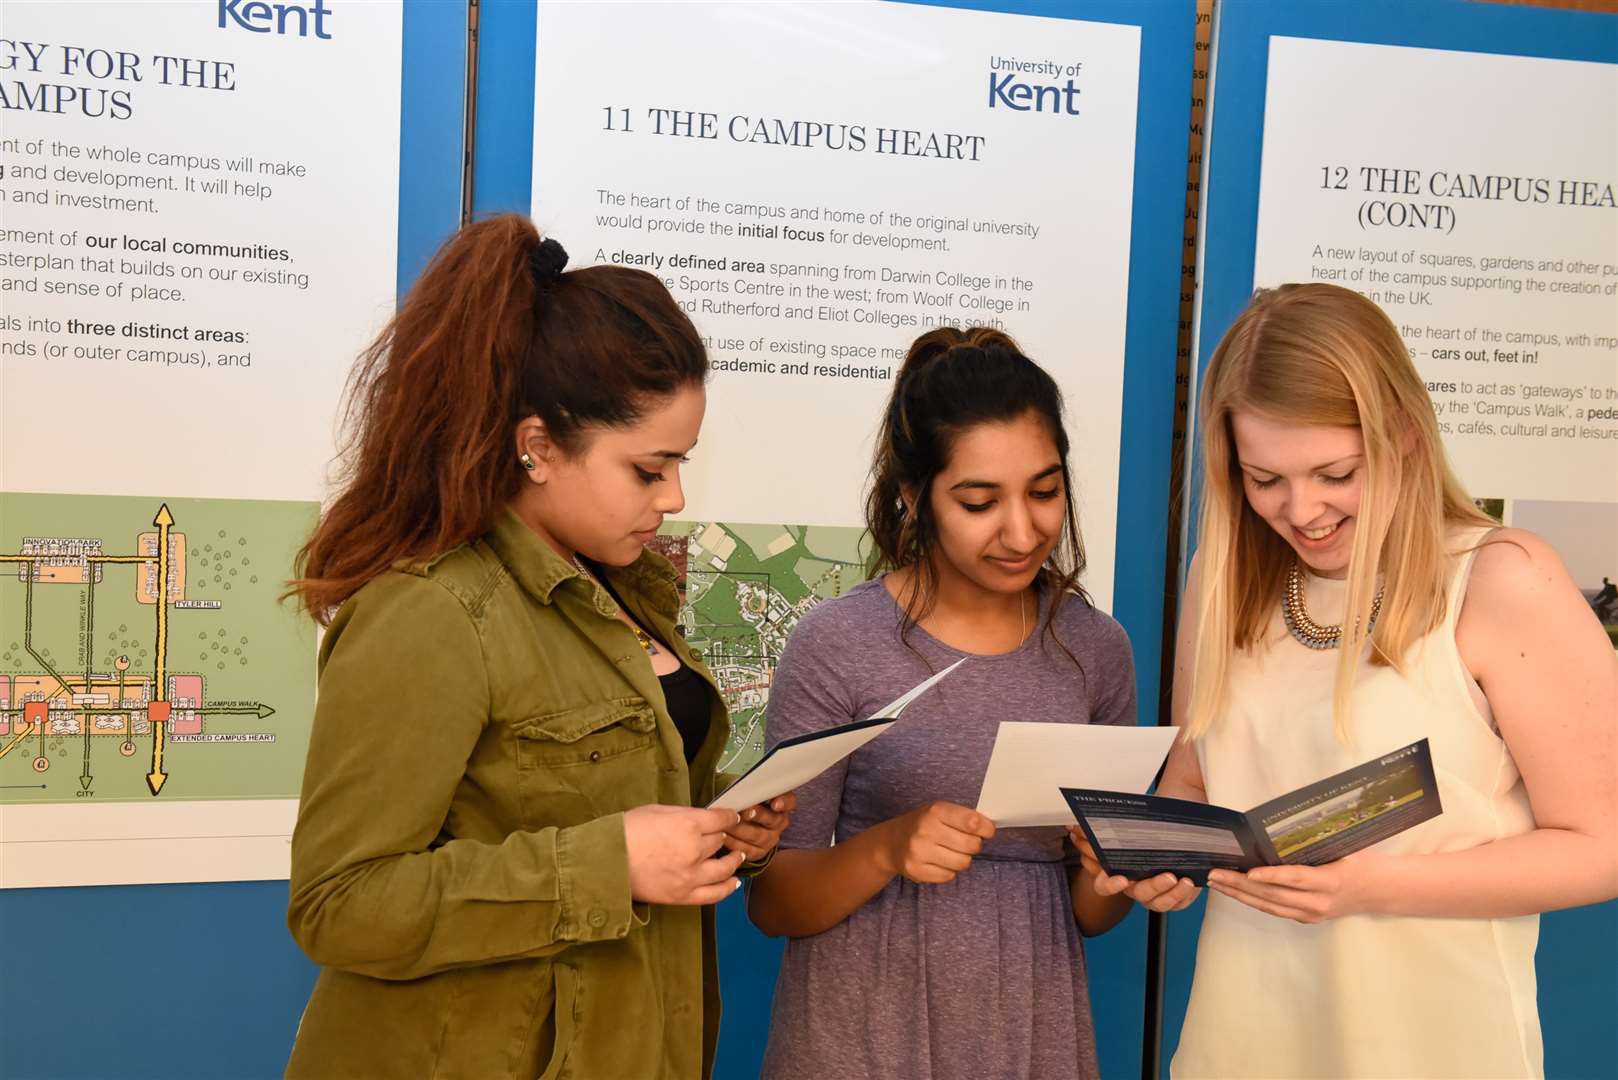 Students view the plans at an earlier exhibition